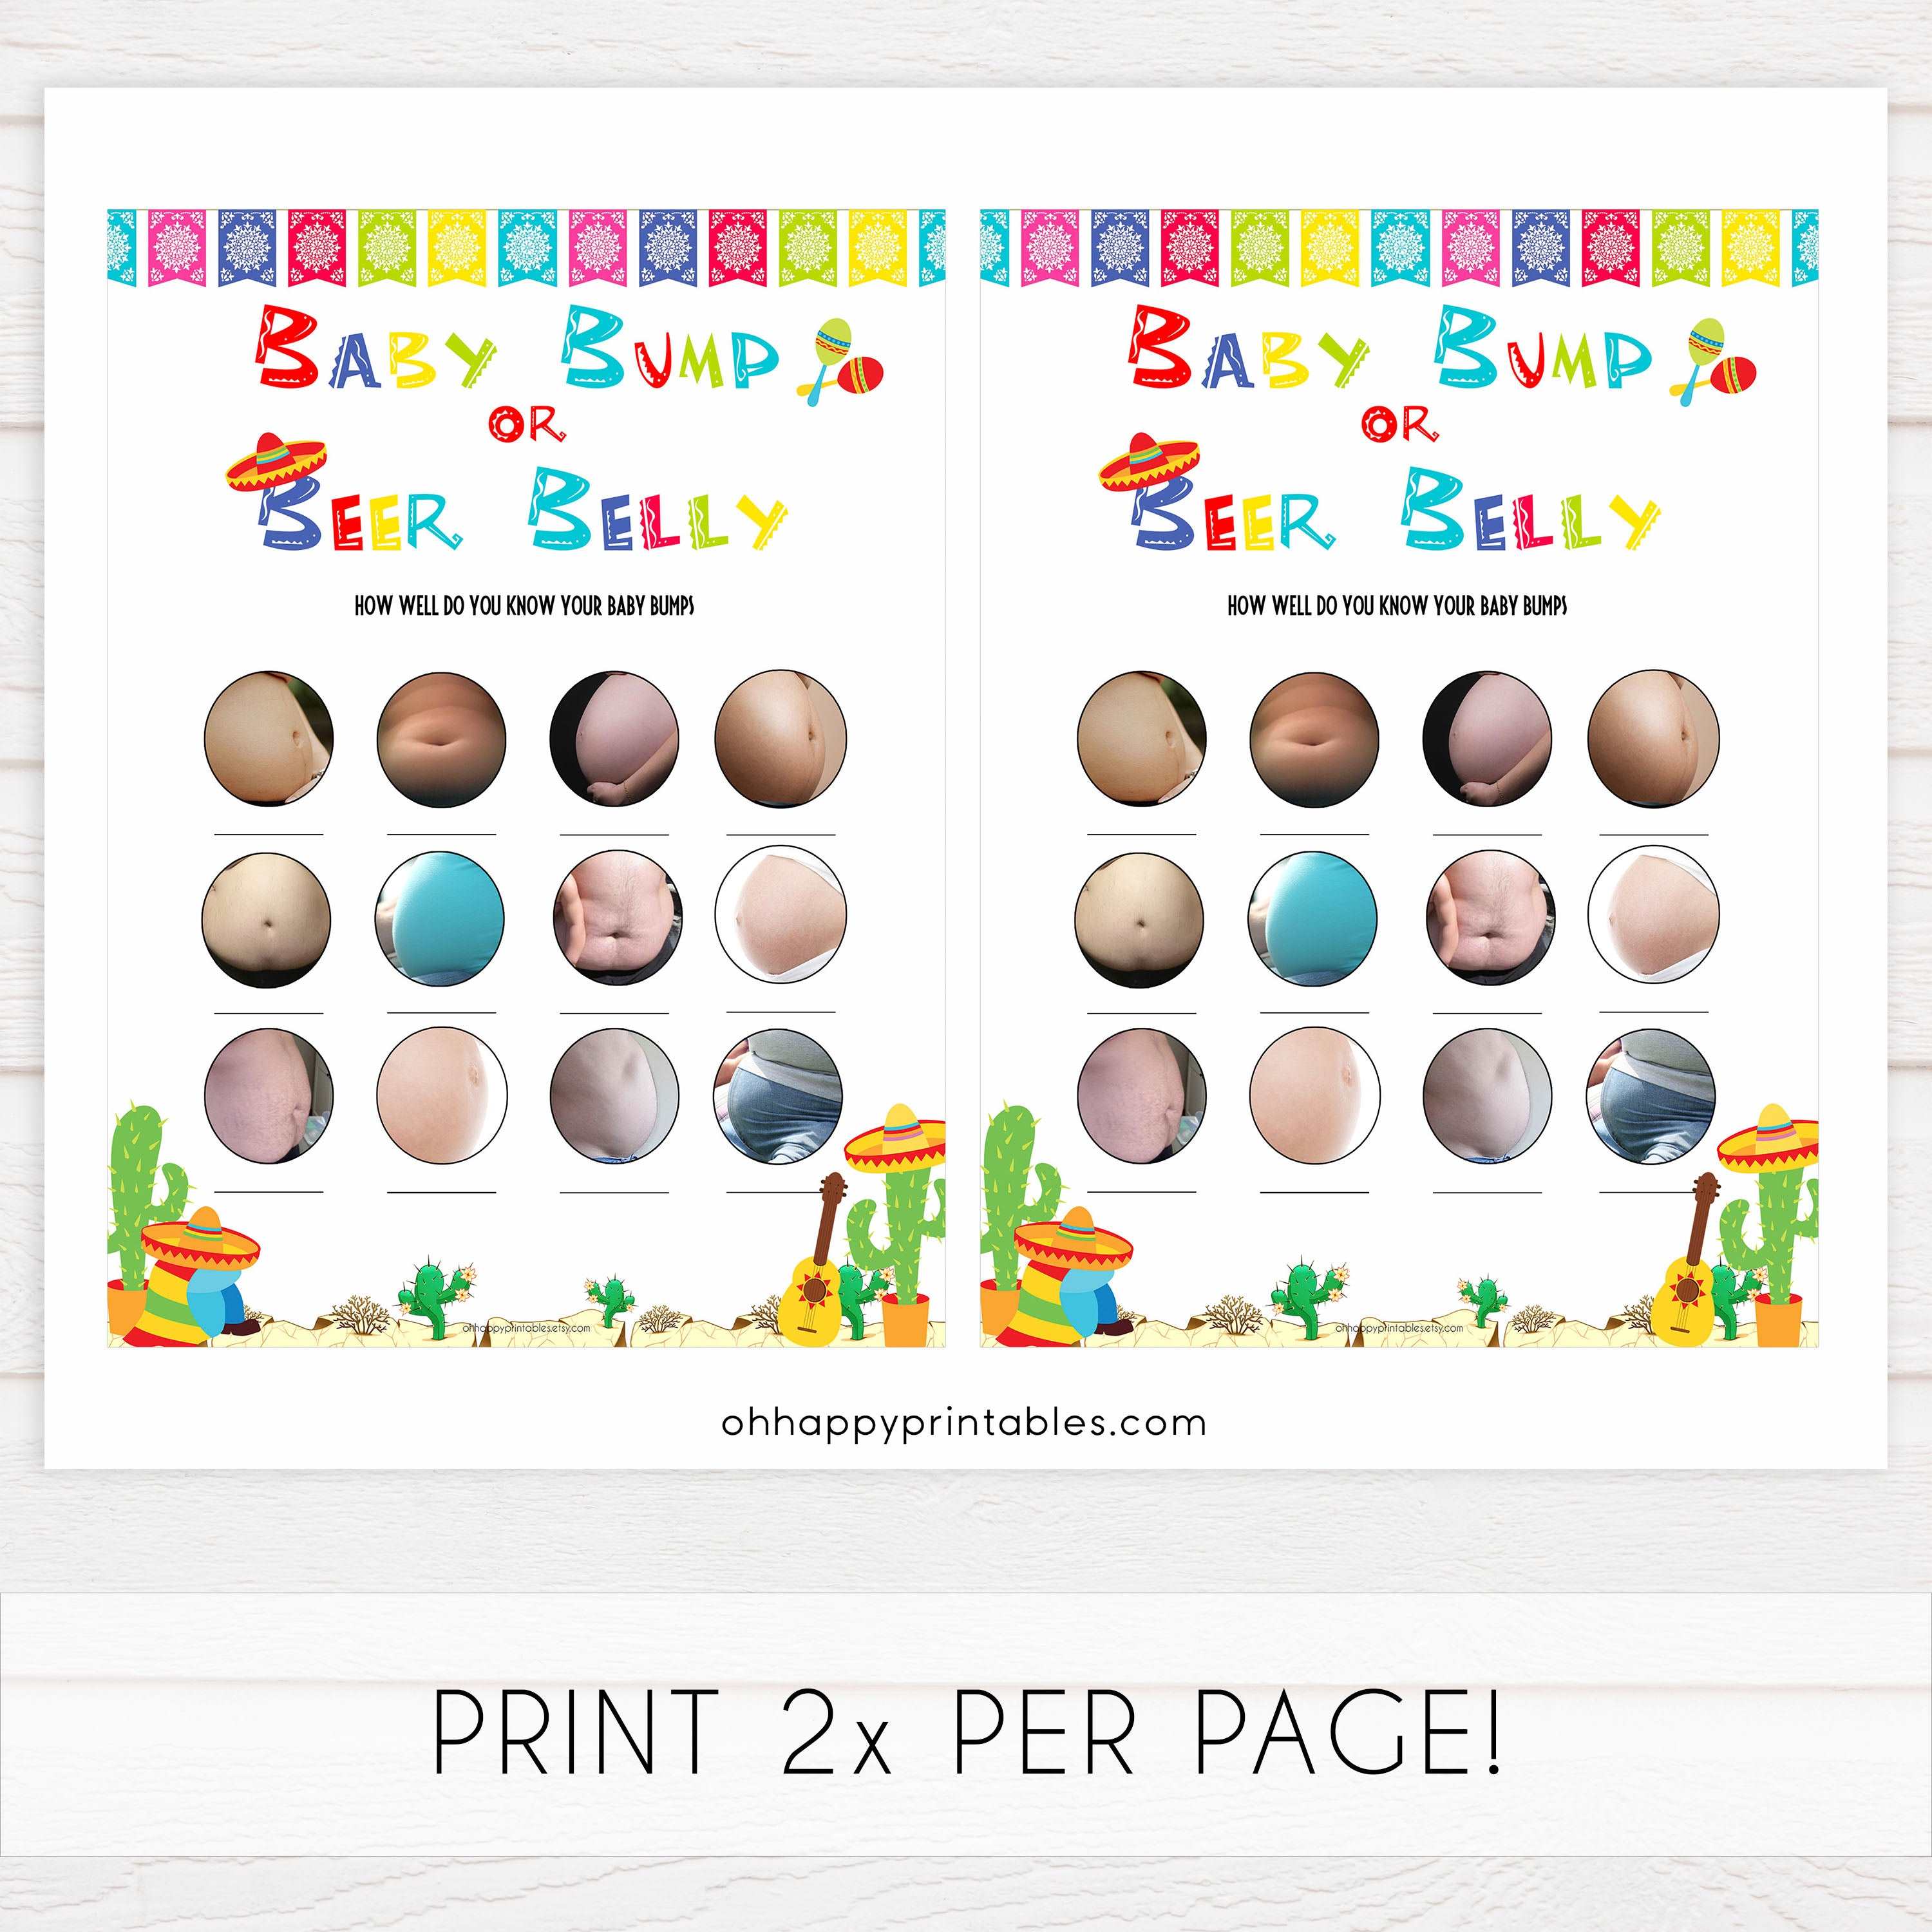 porn or labor, baby bump or beer belly game, Printable baby shower games, Mexican fiesta fun baby games, baby shower games, fun baby shower ideas, top baby shower ideas, fiesta shower baby shower, fiesta baby shower ideas